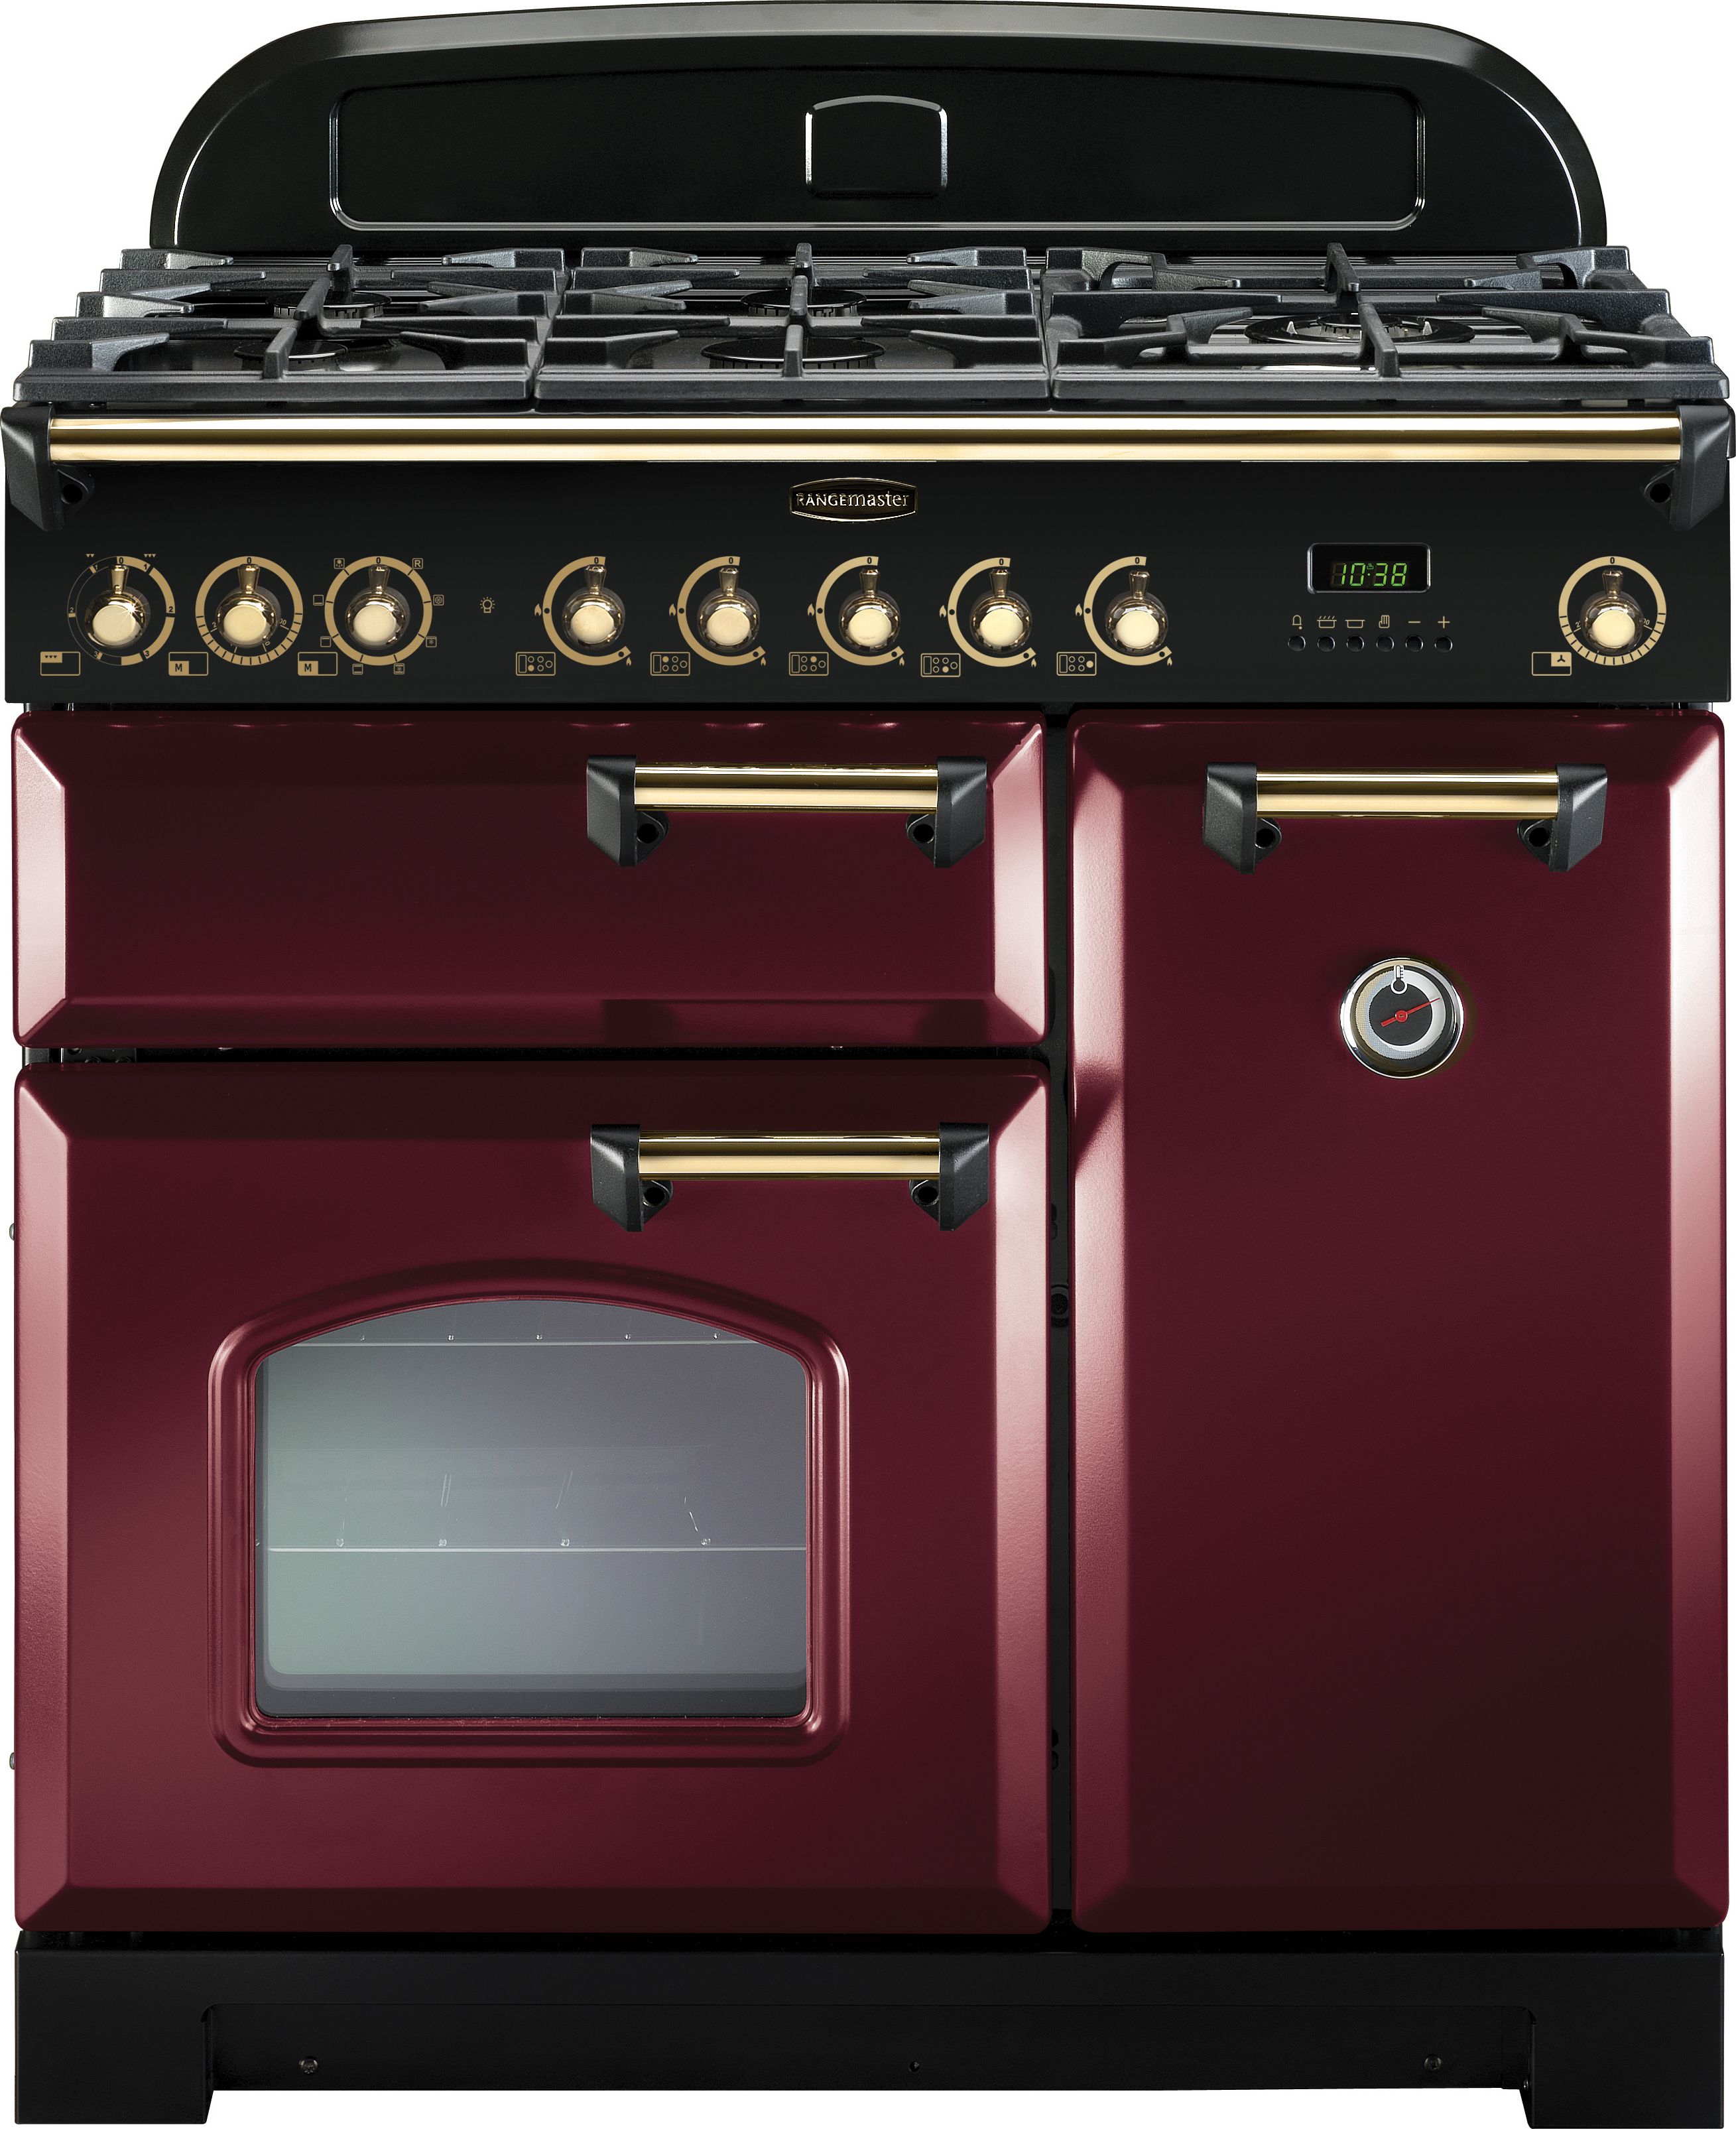 Rangemaster Classic Deluxe CDL90DFFCY/B 90cm Dual Fuel Range Cooker - Cranberry / Brass - A/A Rated, Red